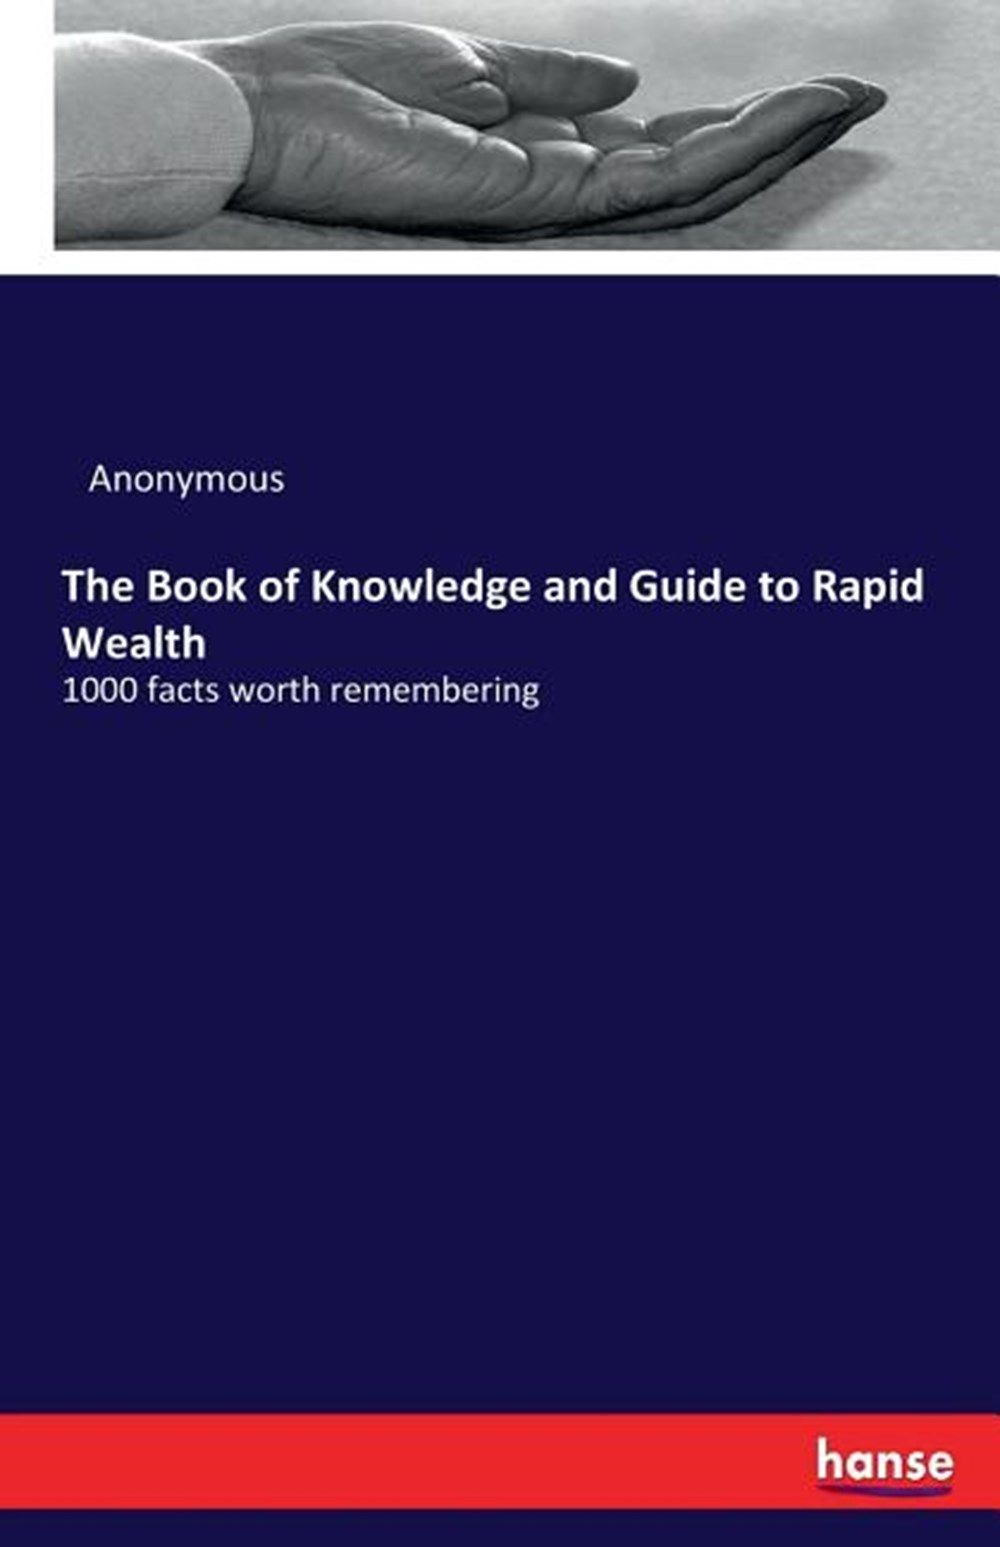 Book of Knowledge and Guide to Rapid Wealth 1000 facts worth remembering